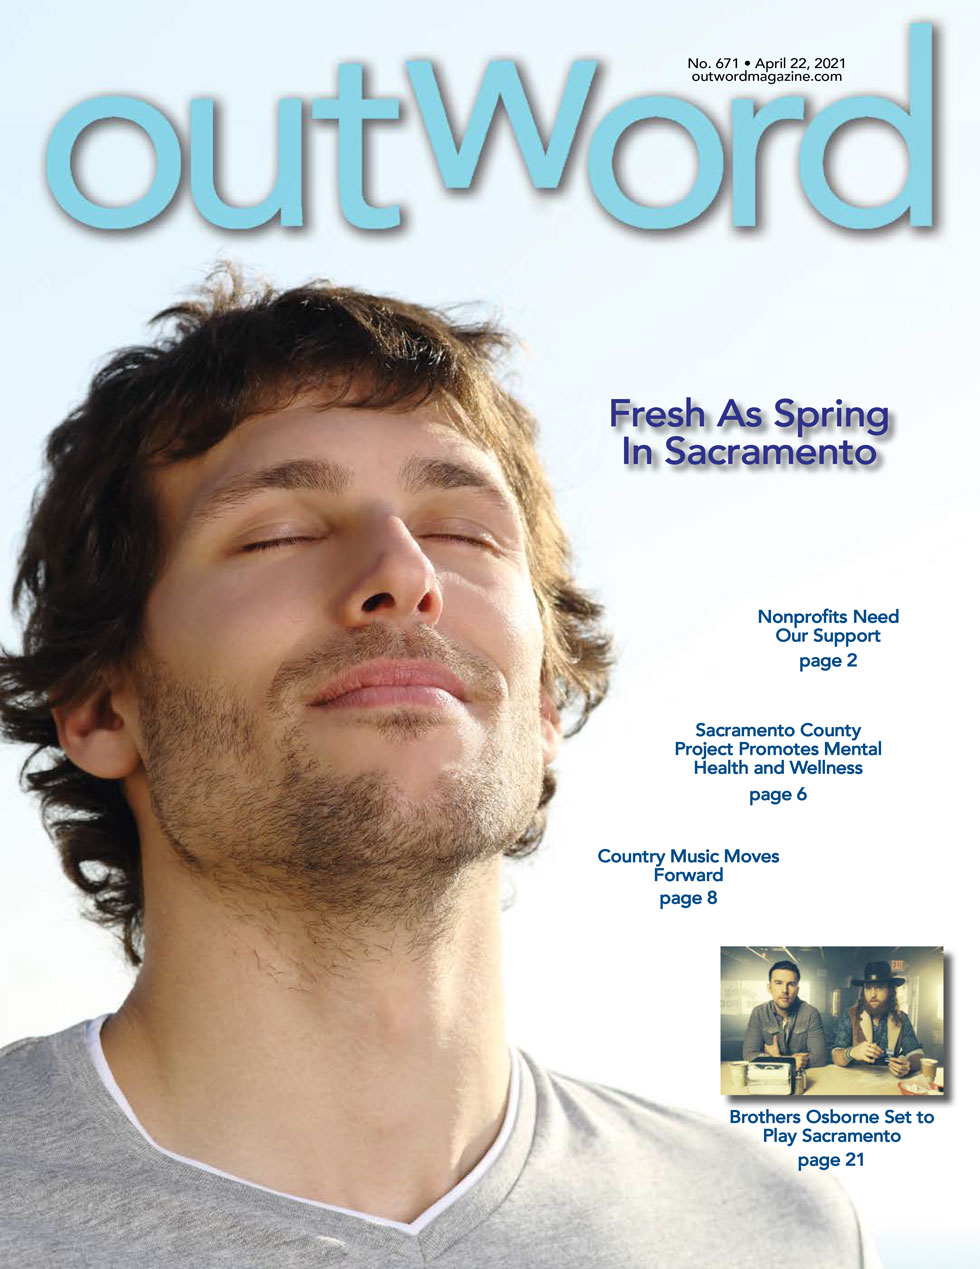 April 22, 2021 | Another new issue is OUT as Fresh as Spring in Sacramento